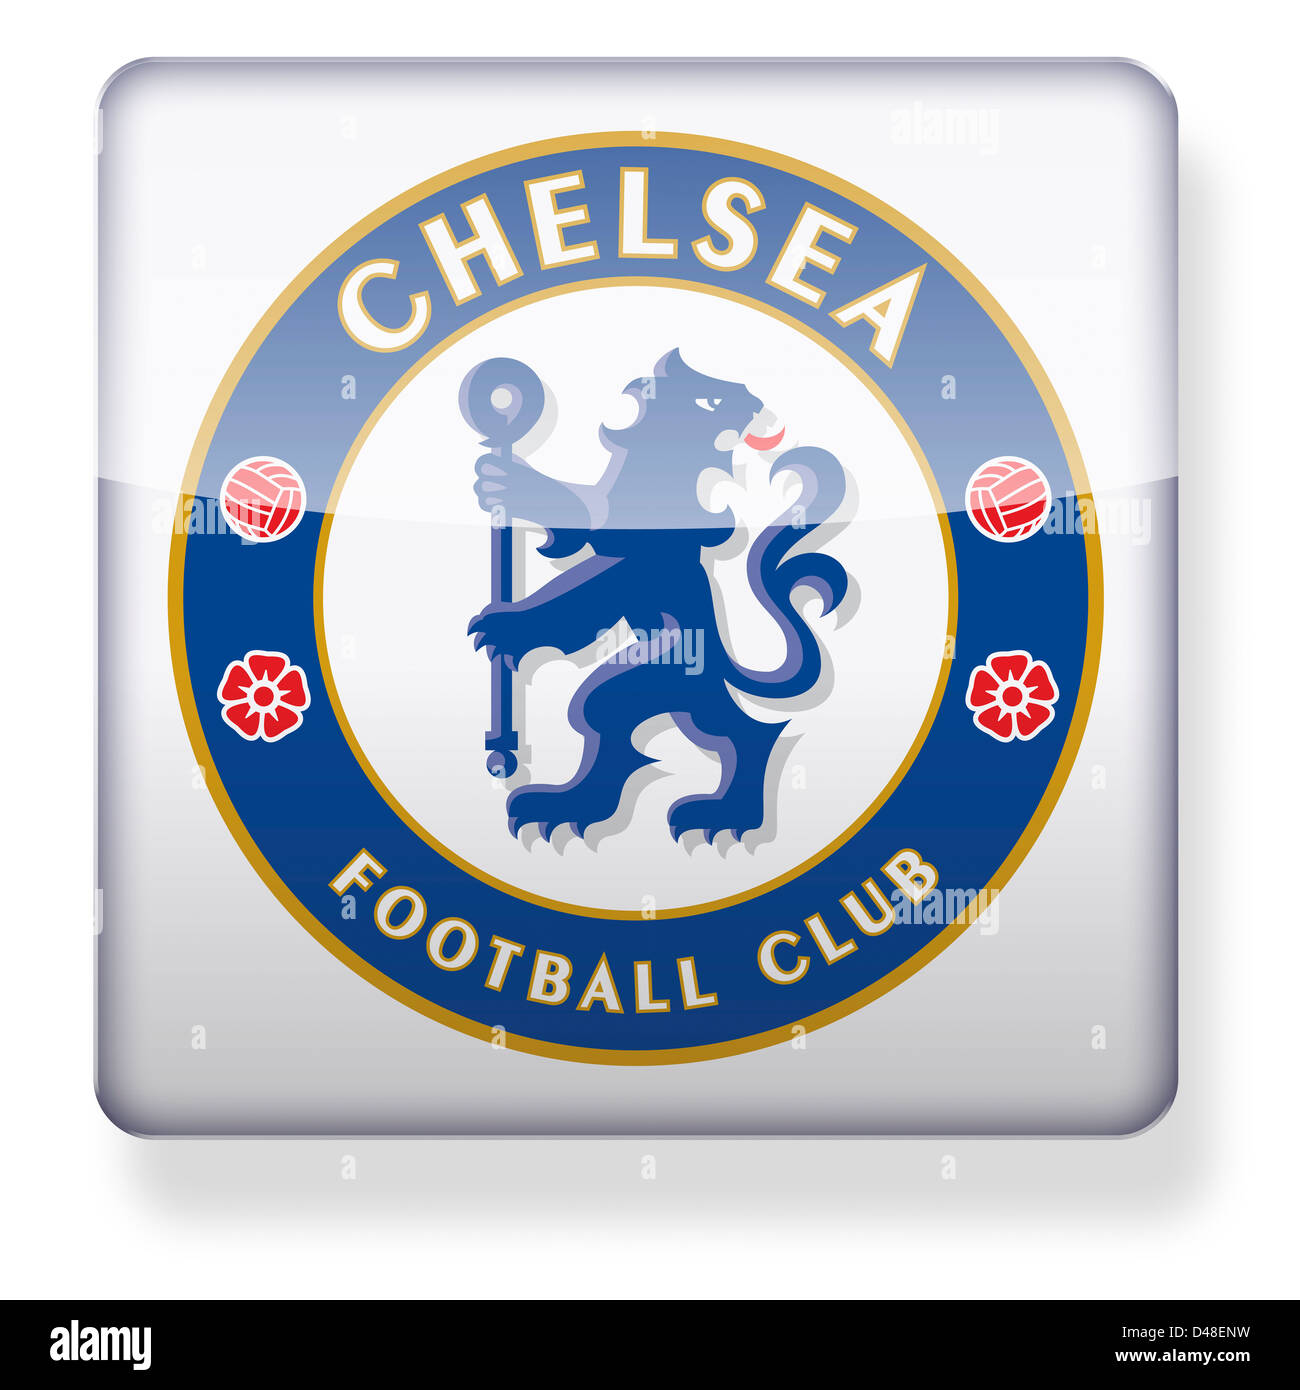 Chelsea football club logo as an app icon. Clipping path included. Stock Photo